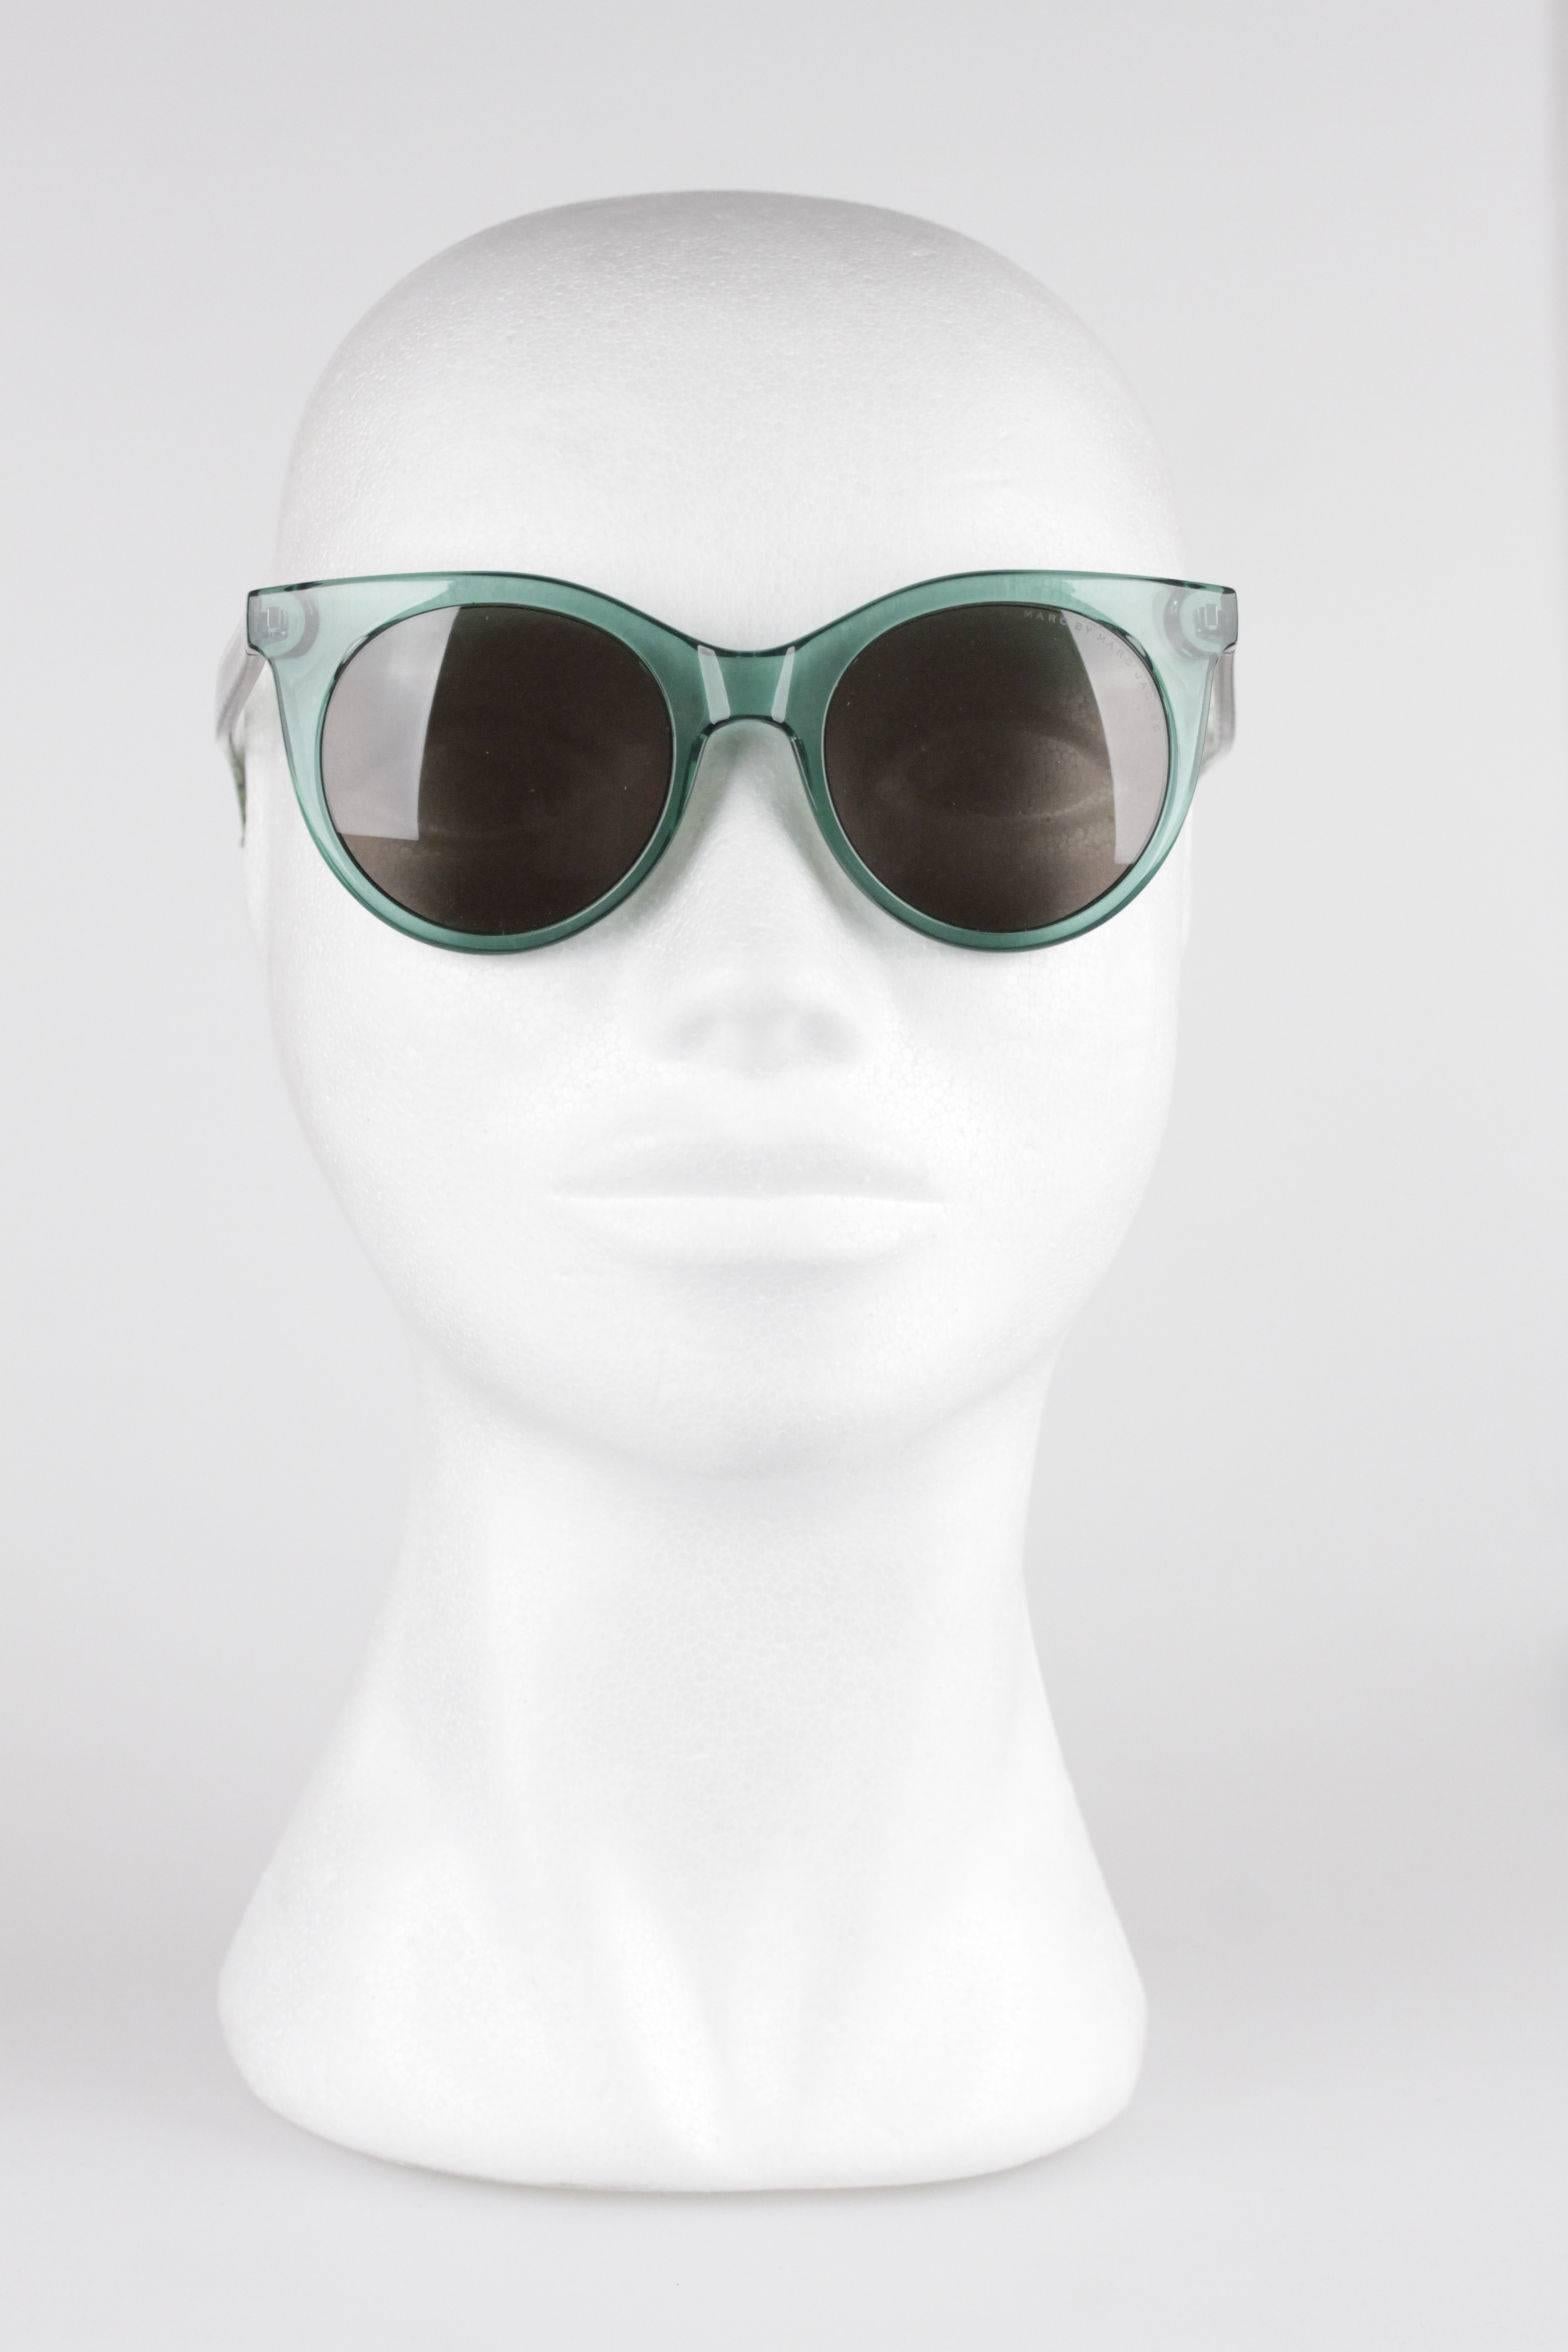 MARC by MARC JACOBS Eyewear MMJ 412/S 6HO 70 Green SUNGLASSES w/ CASE In New Condition In Rome, Rome